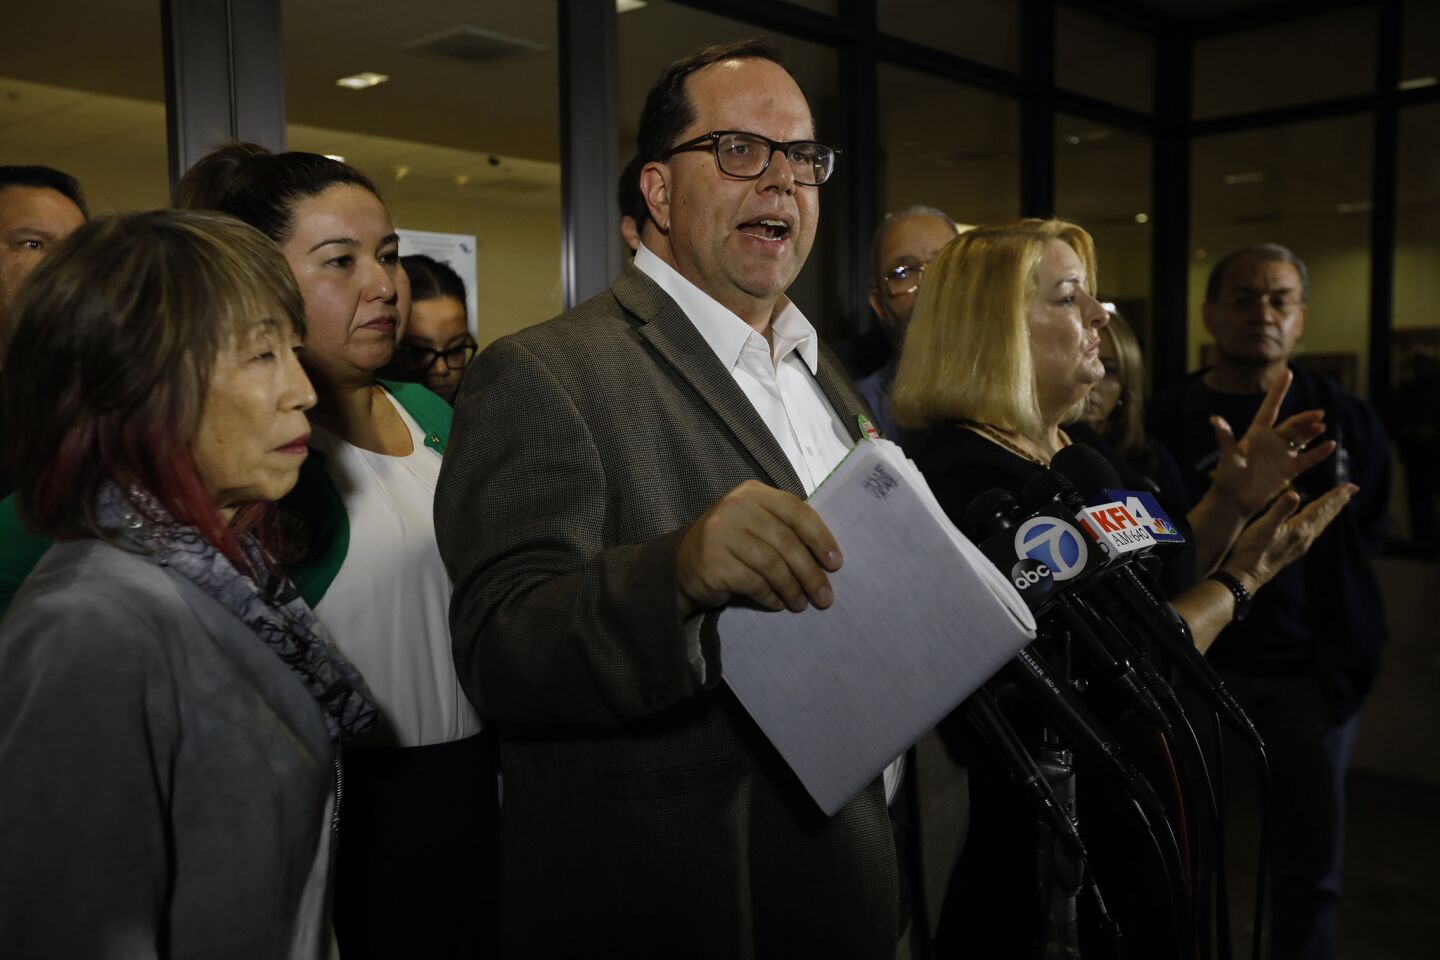 Alex Caputo-Pearl, president of United Teachers Los Angeles, speaks at a news conference about negotiations with the school district Wednesday.